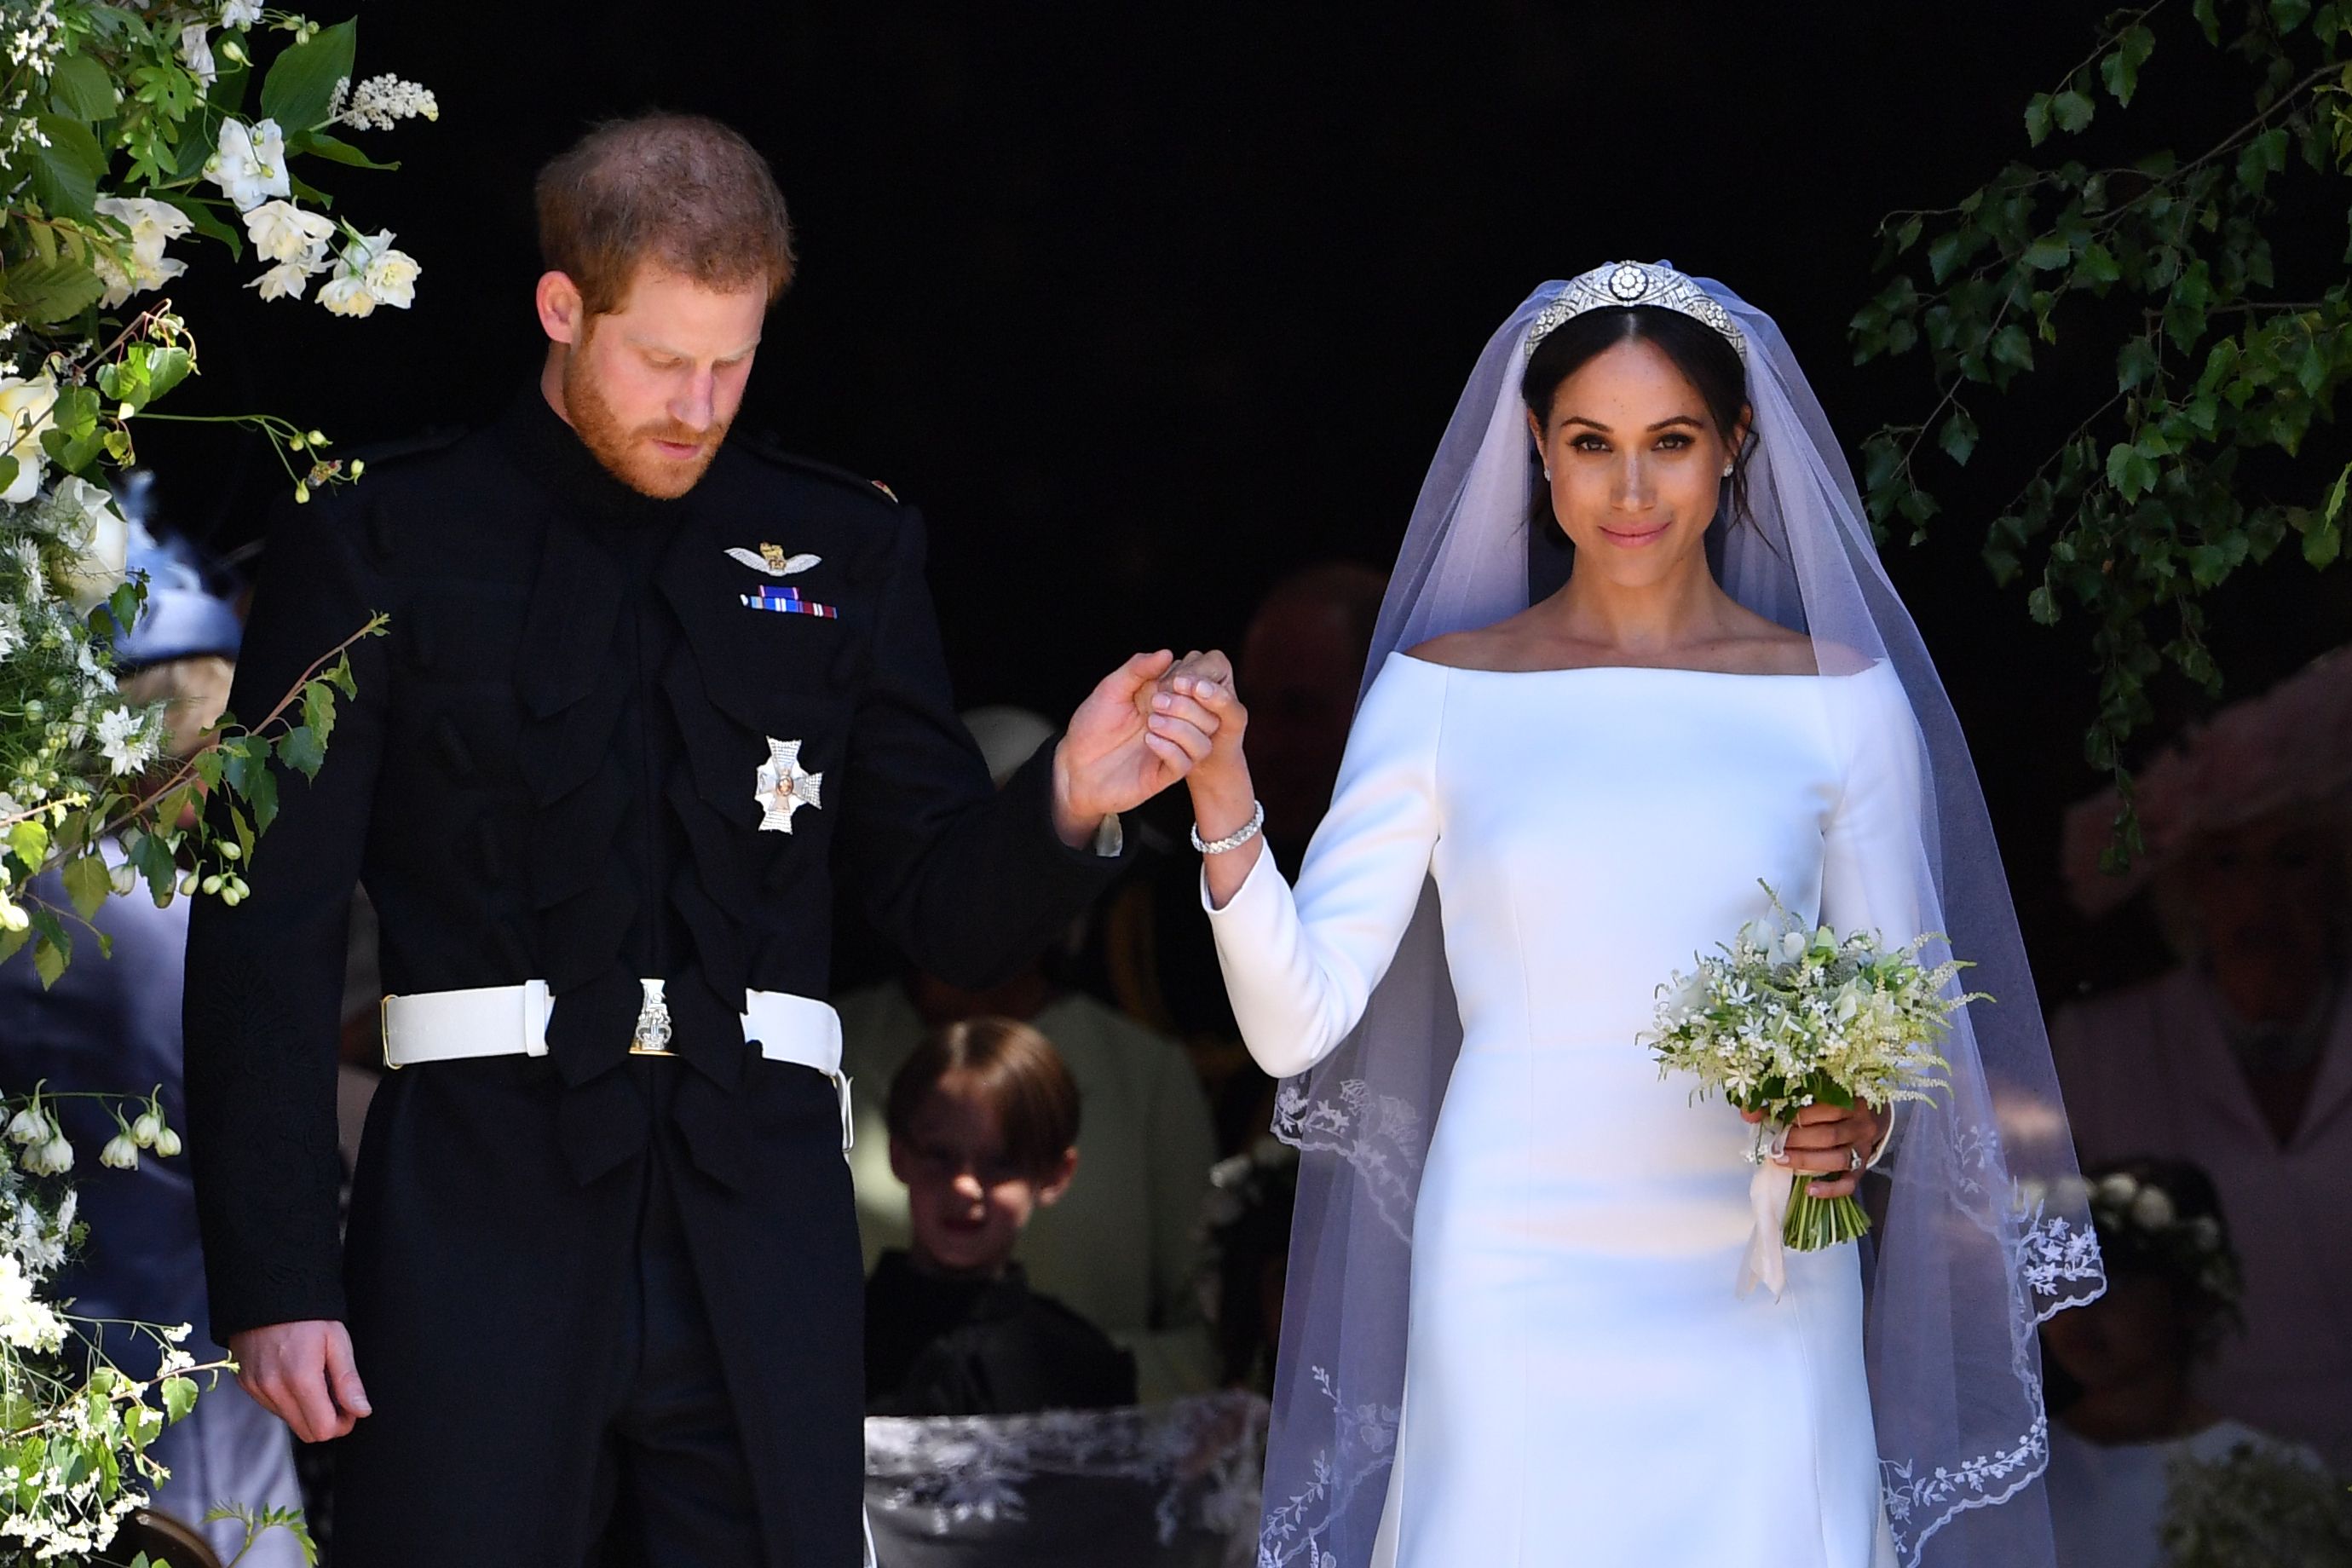 How the Networks are Covering the Royal Wedding